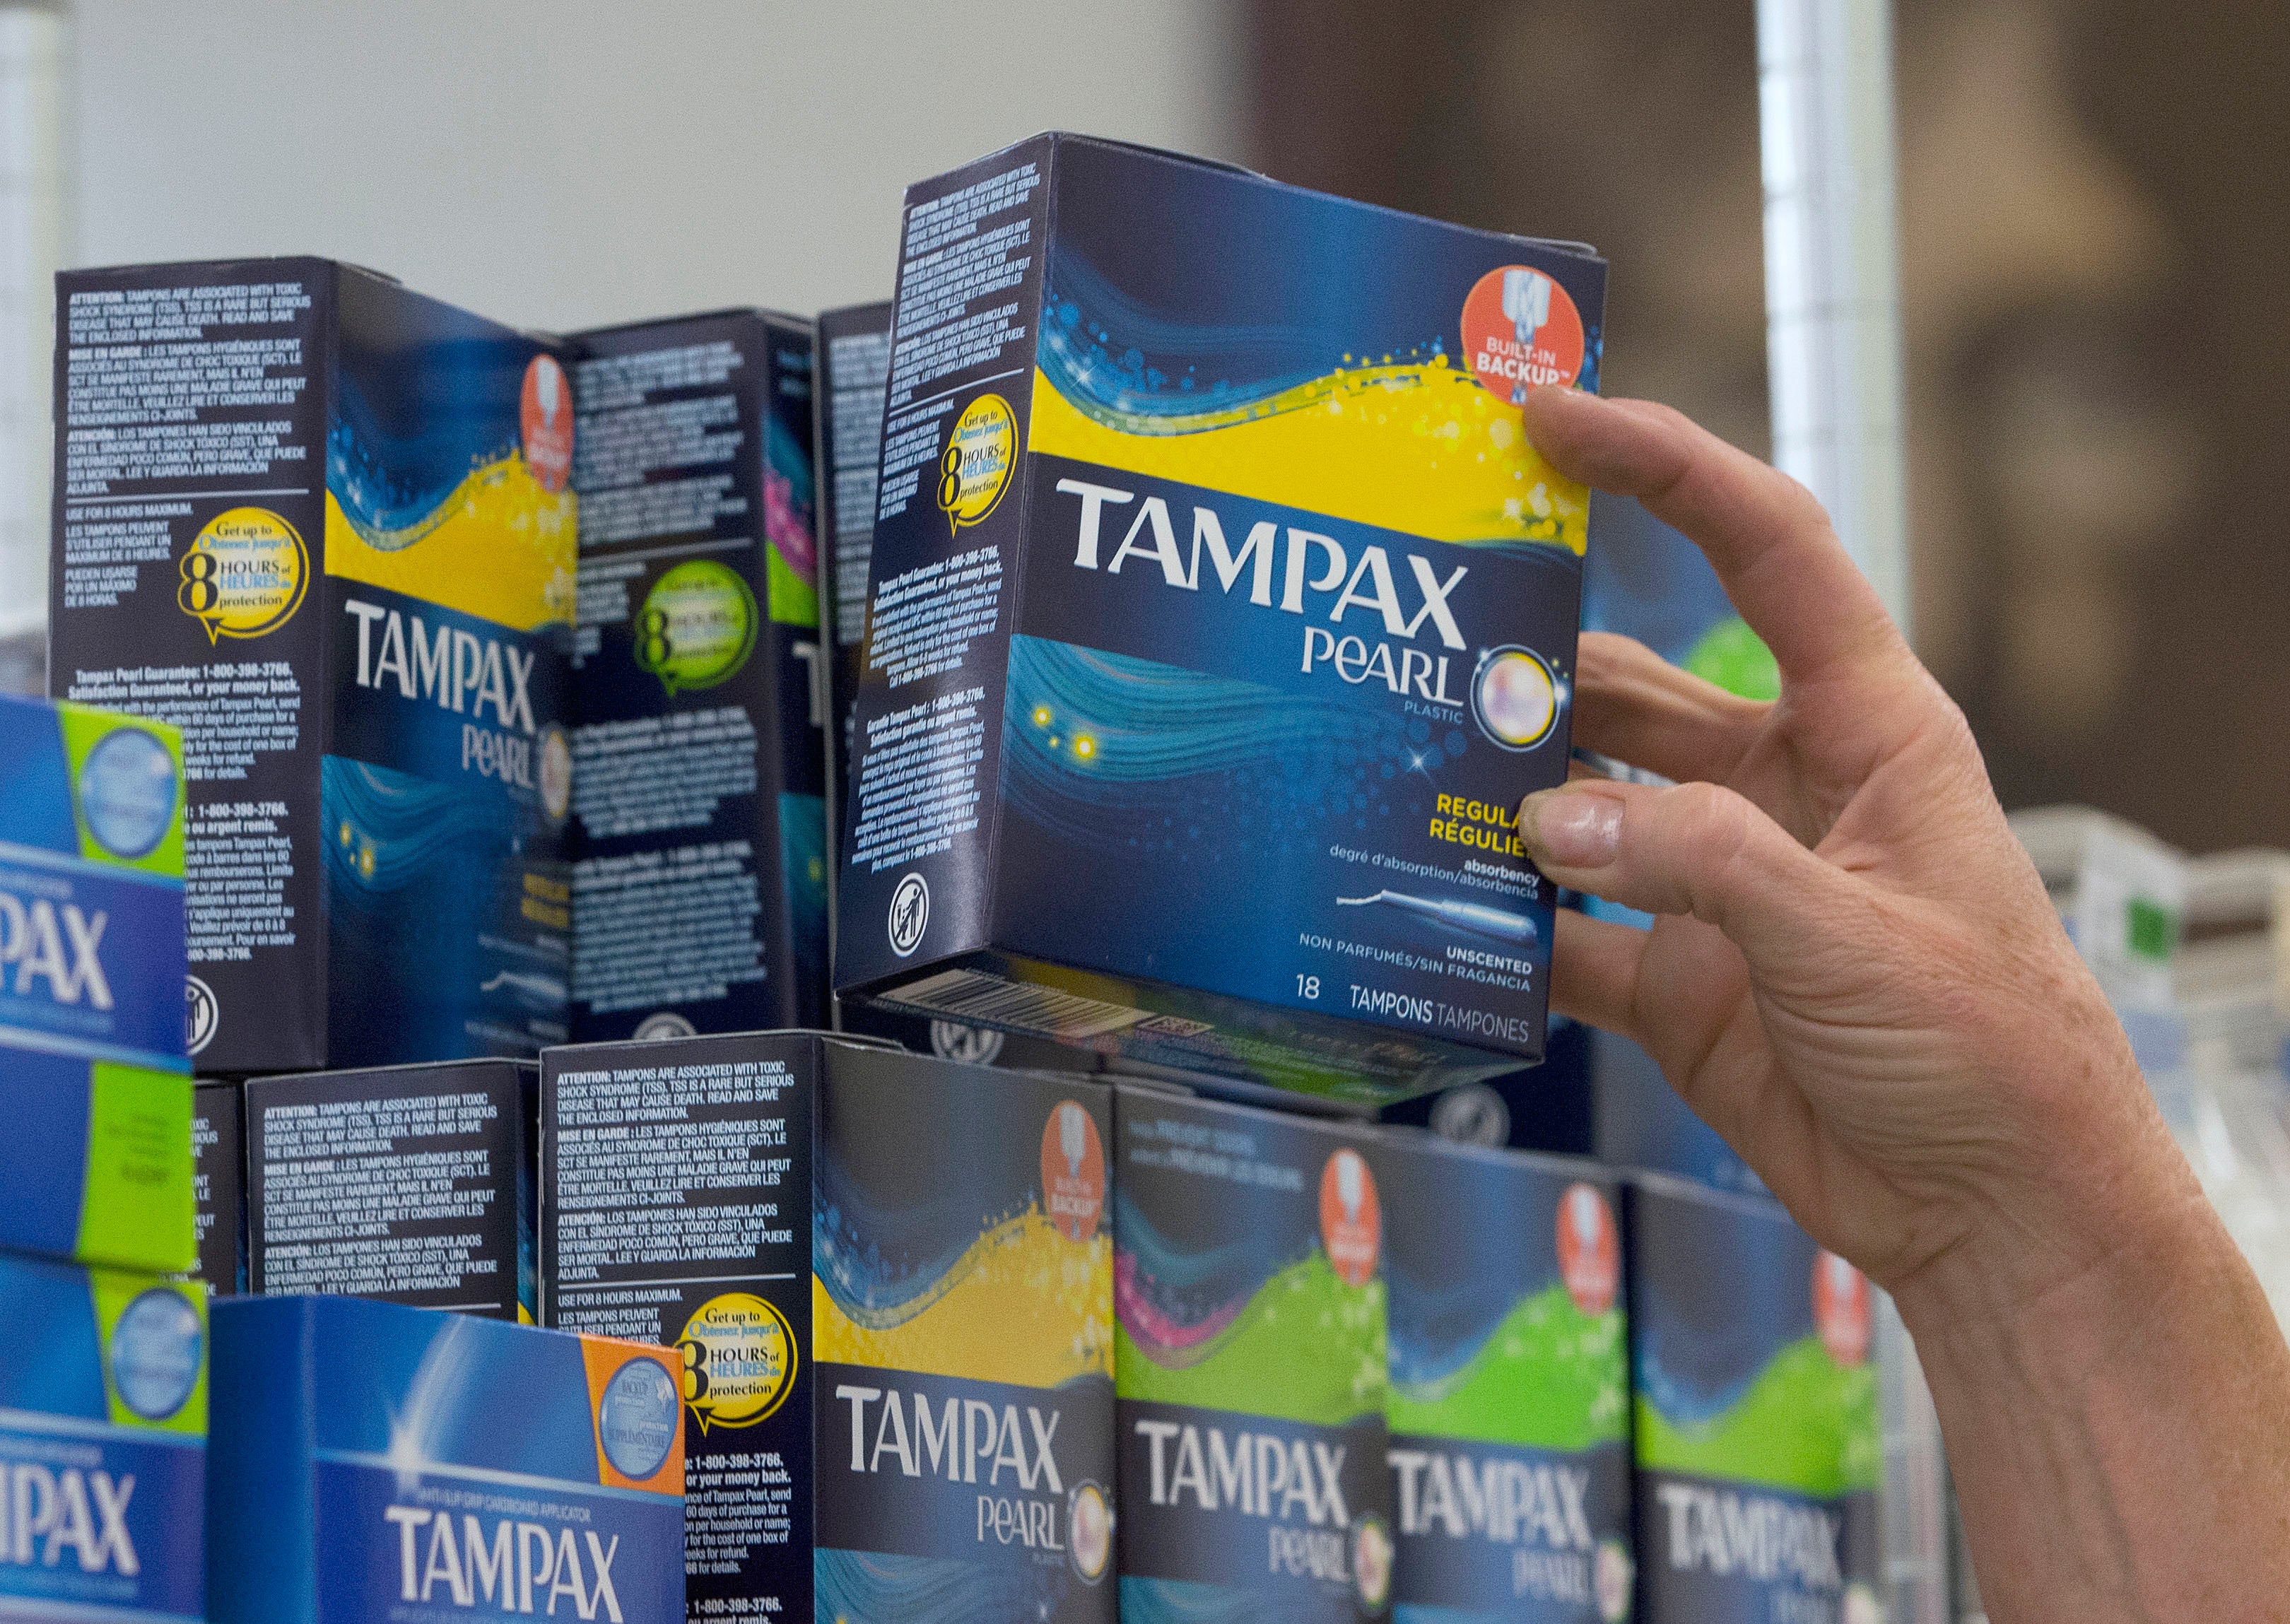 Tampax being stocked at a supermarket in Sacramento, California